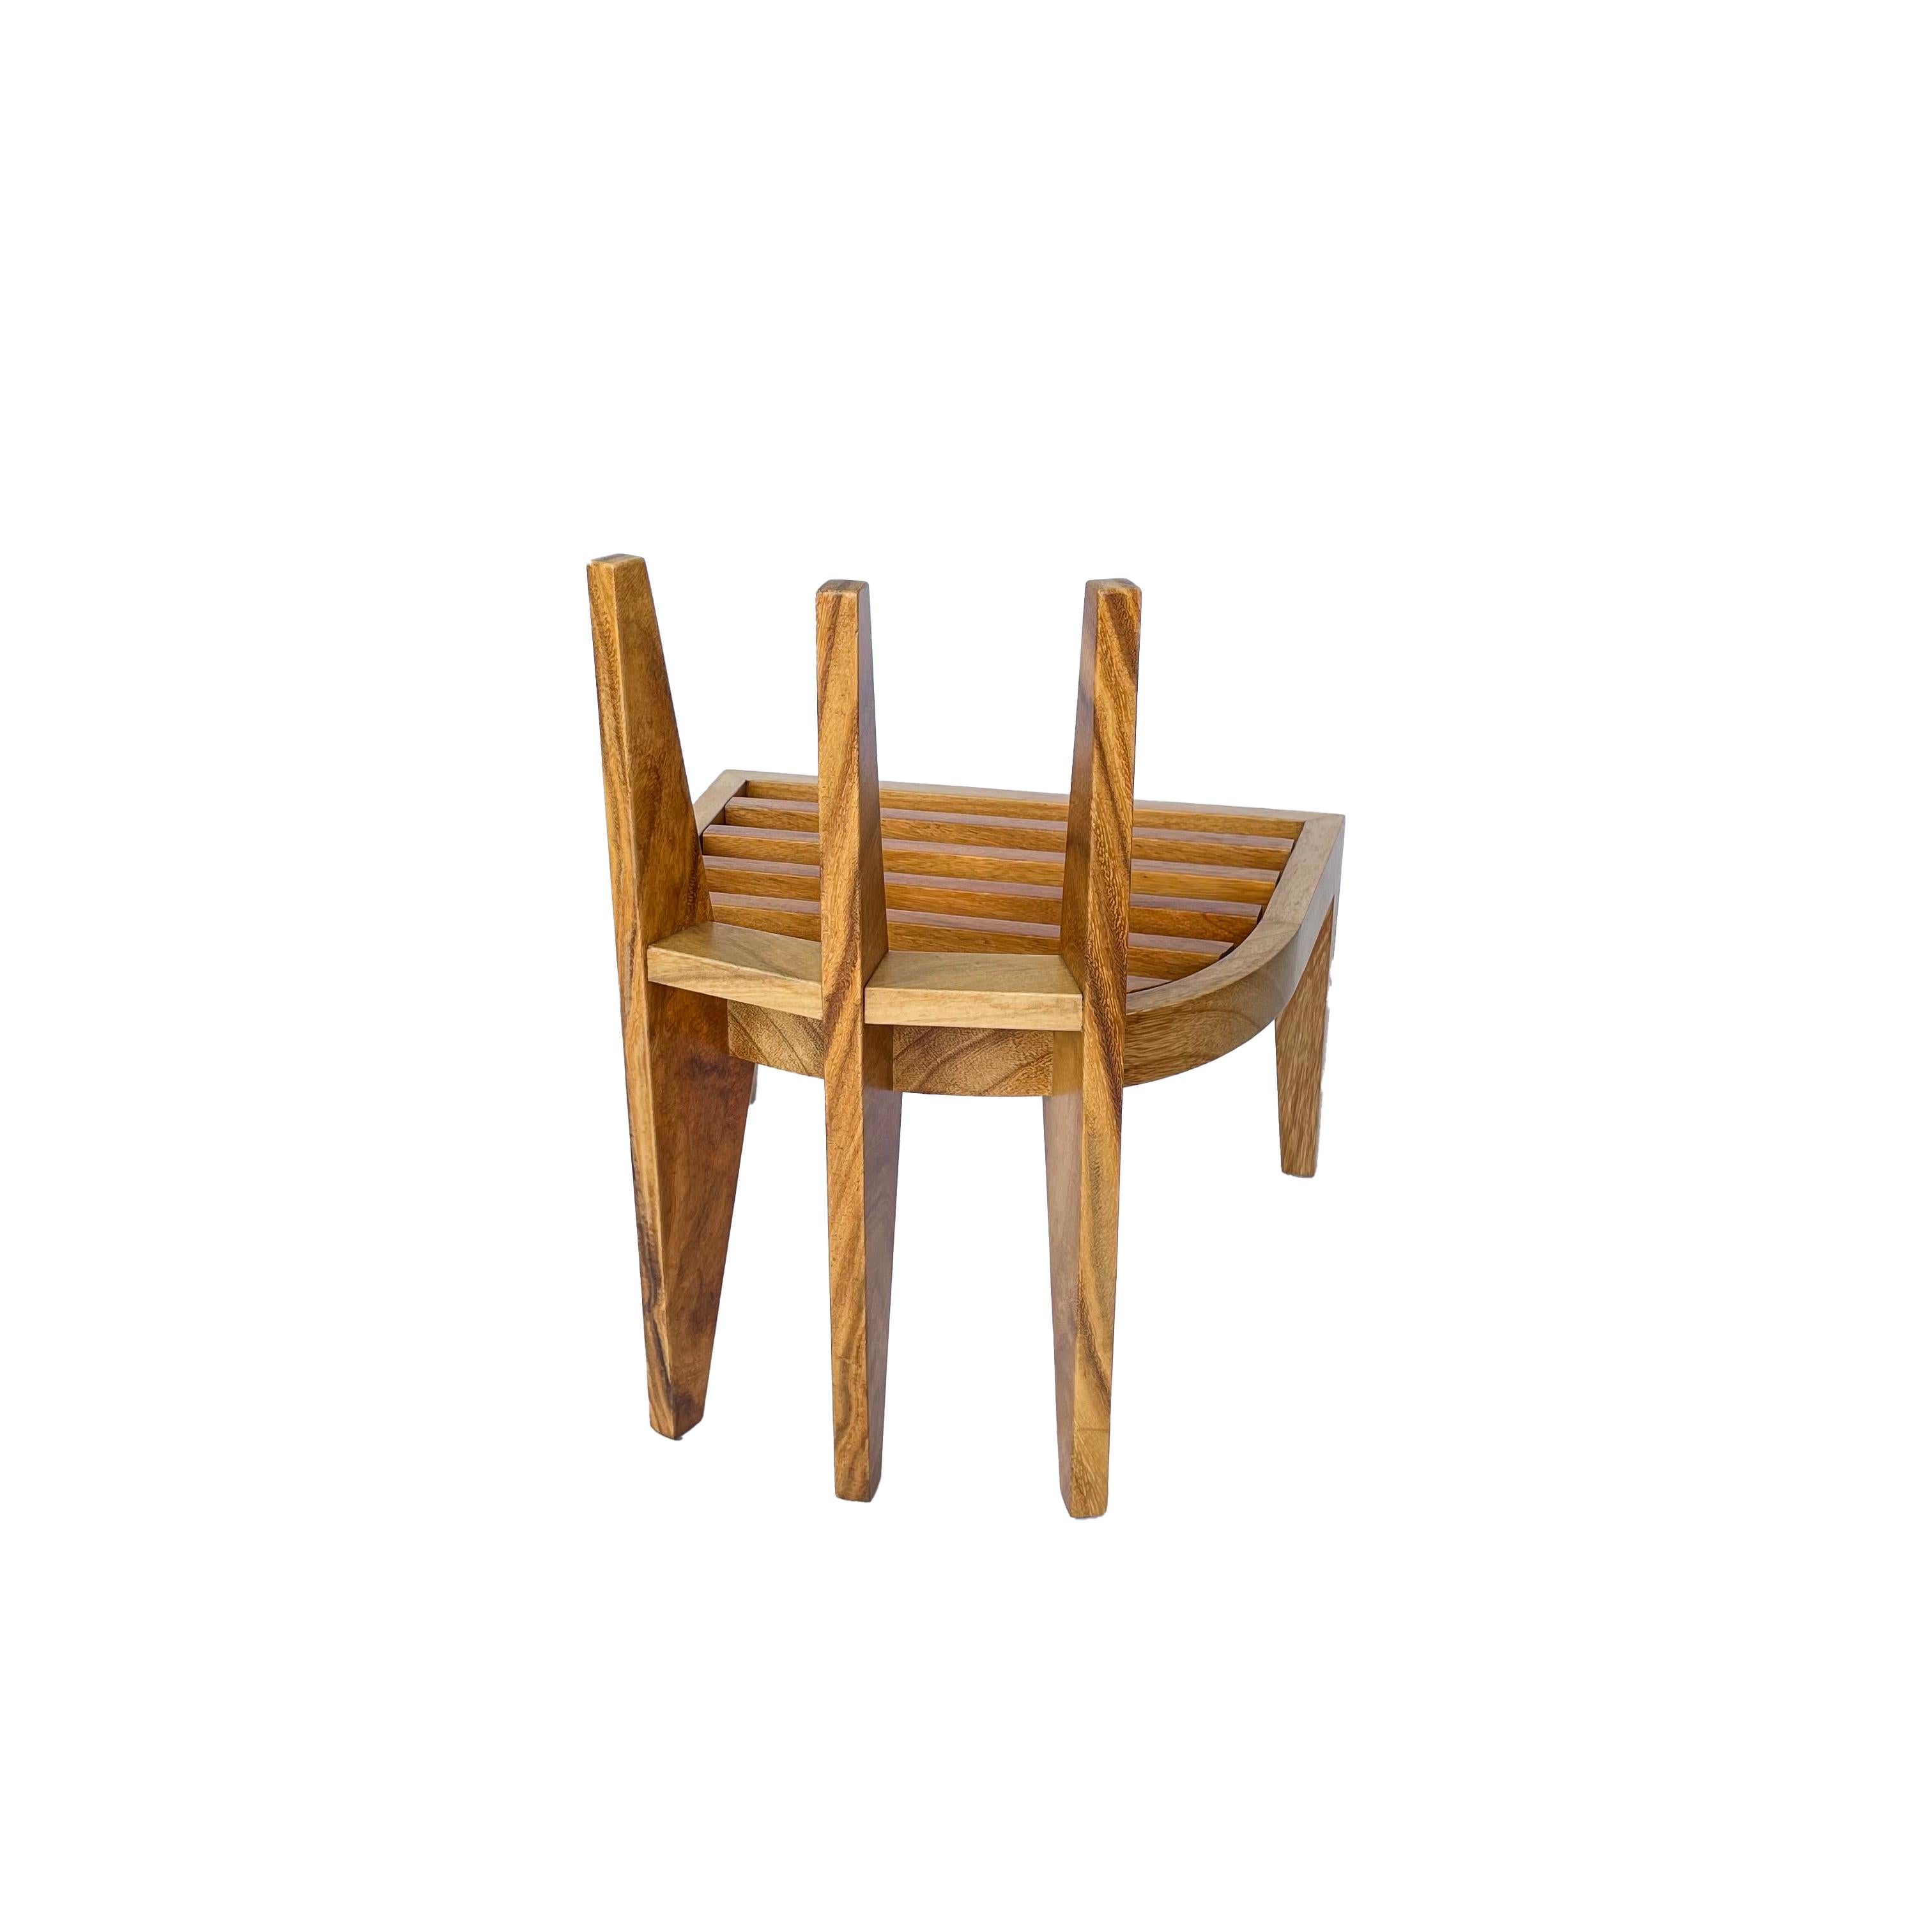 Upholstery Modern Wood Stool by Pierre Sarkis For Sale